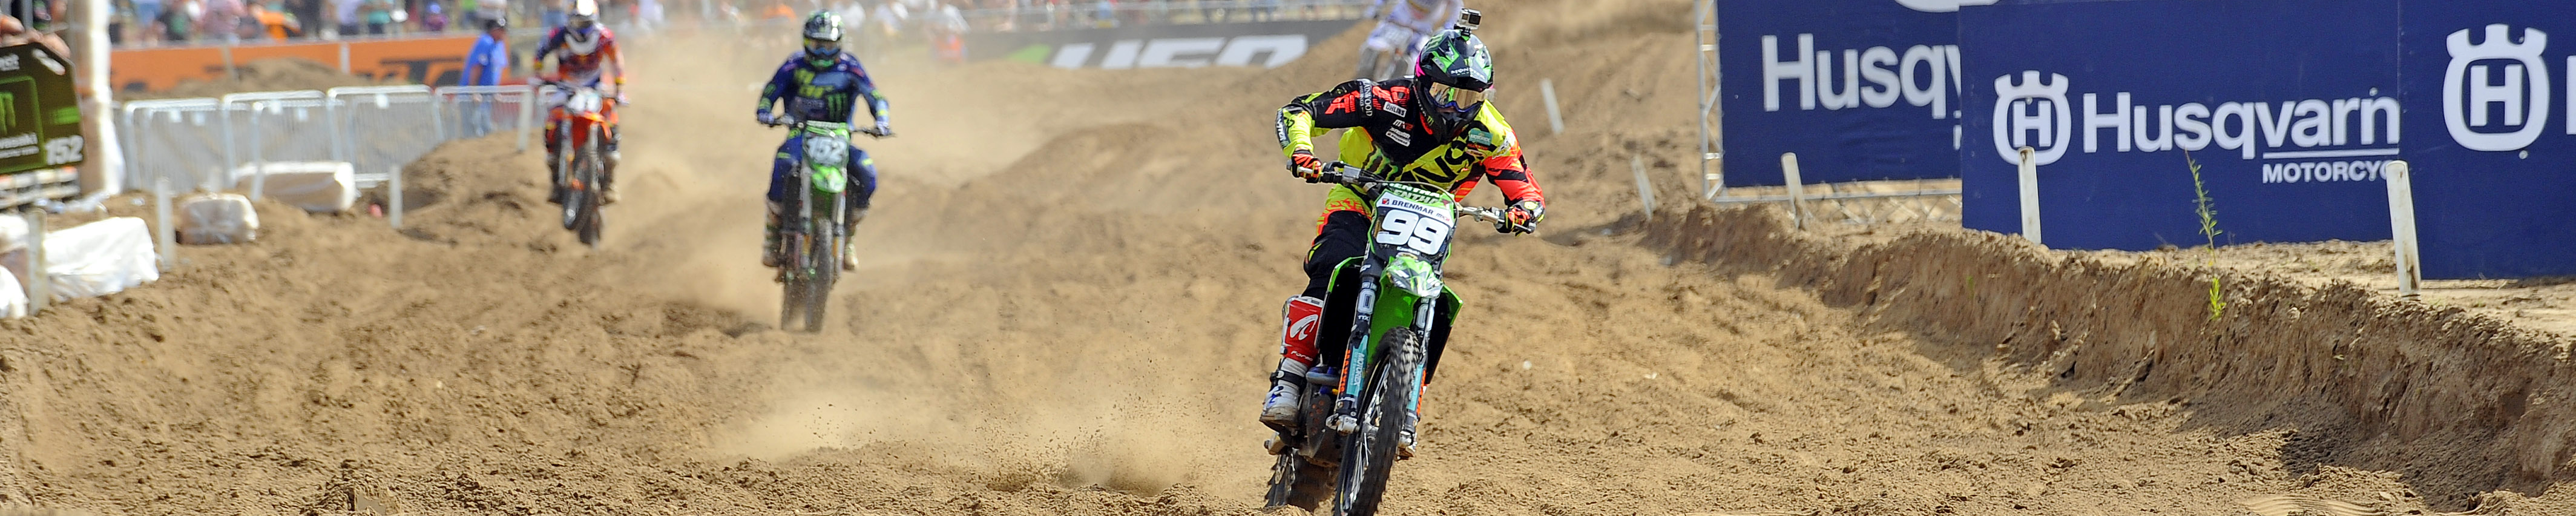 Anstie breaks into MX2 podium ceremony with second place in Germany